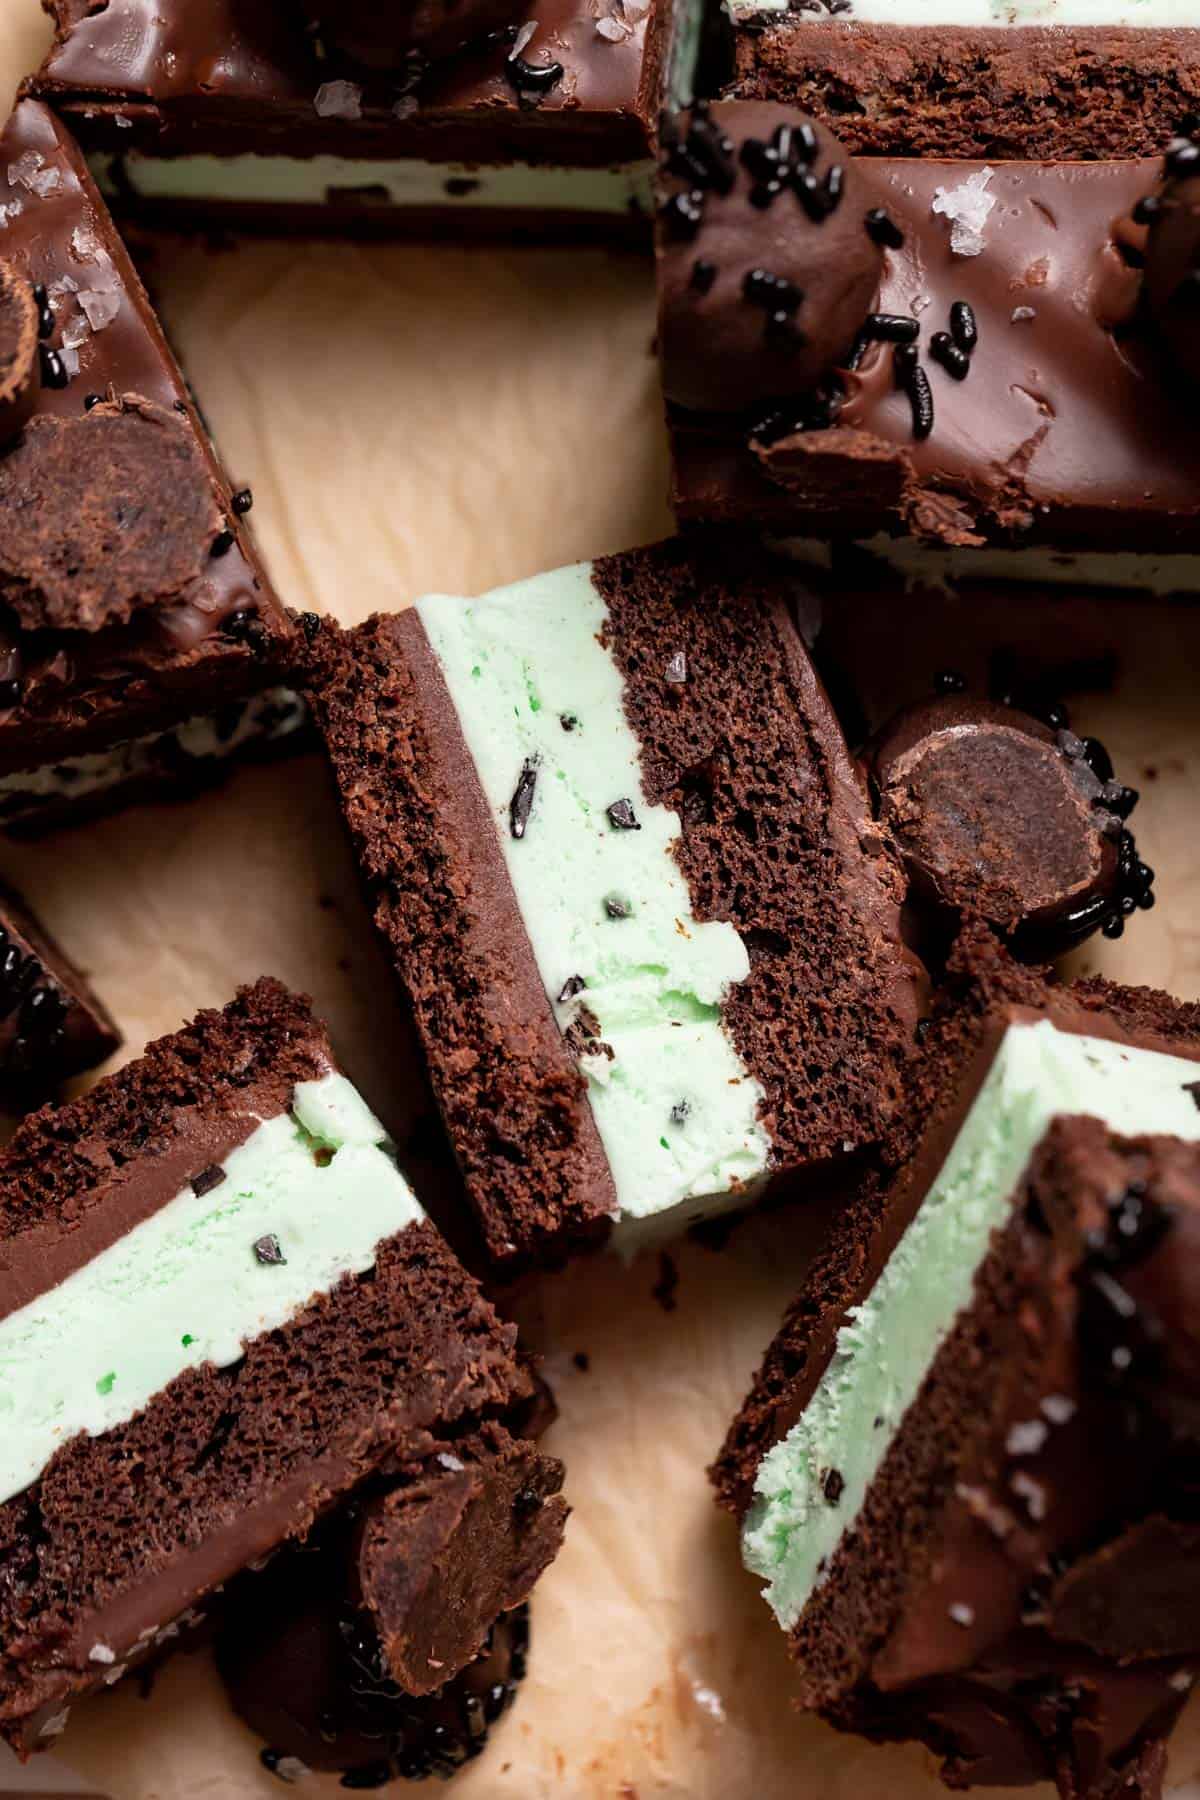 slices of mint chocolate ice cream cake on brown parchment paper.